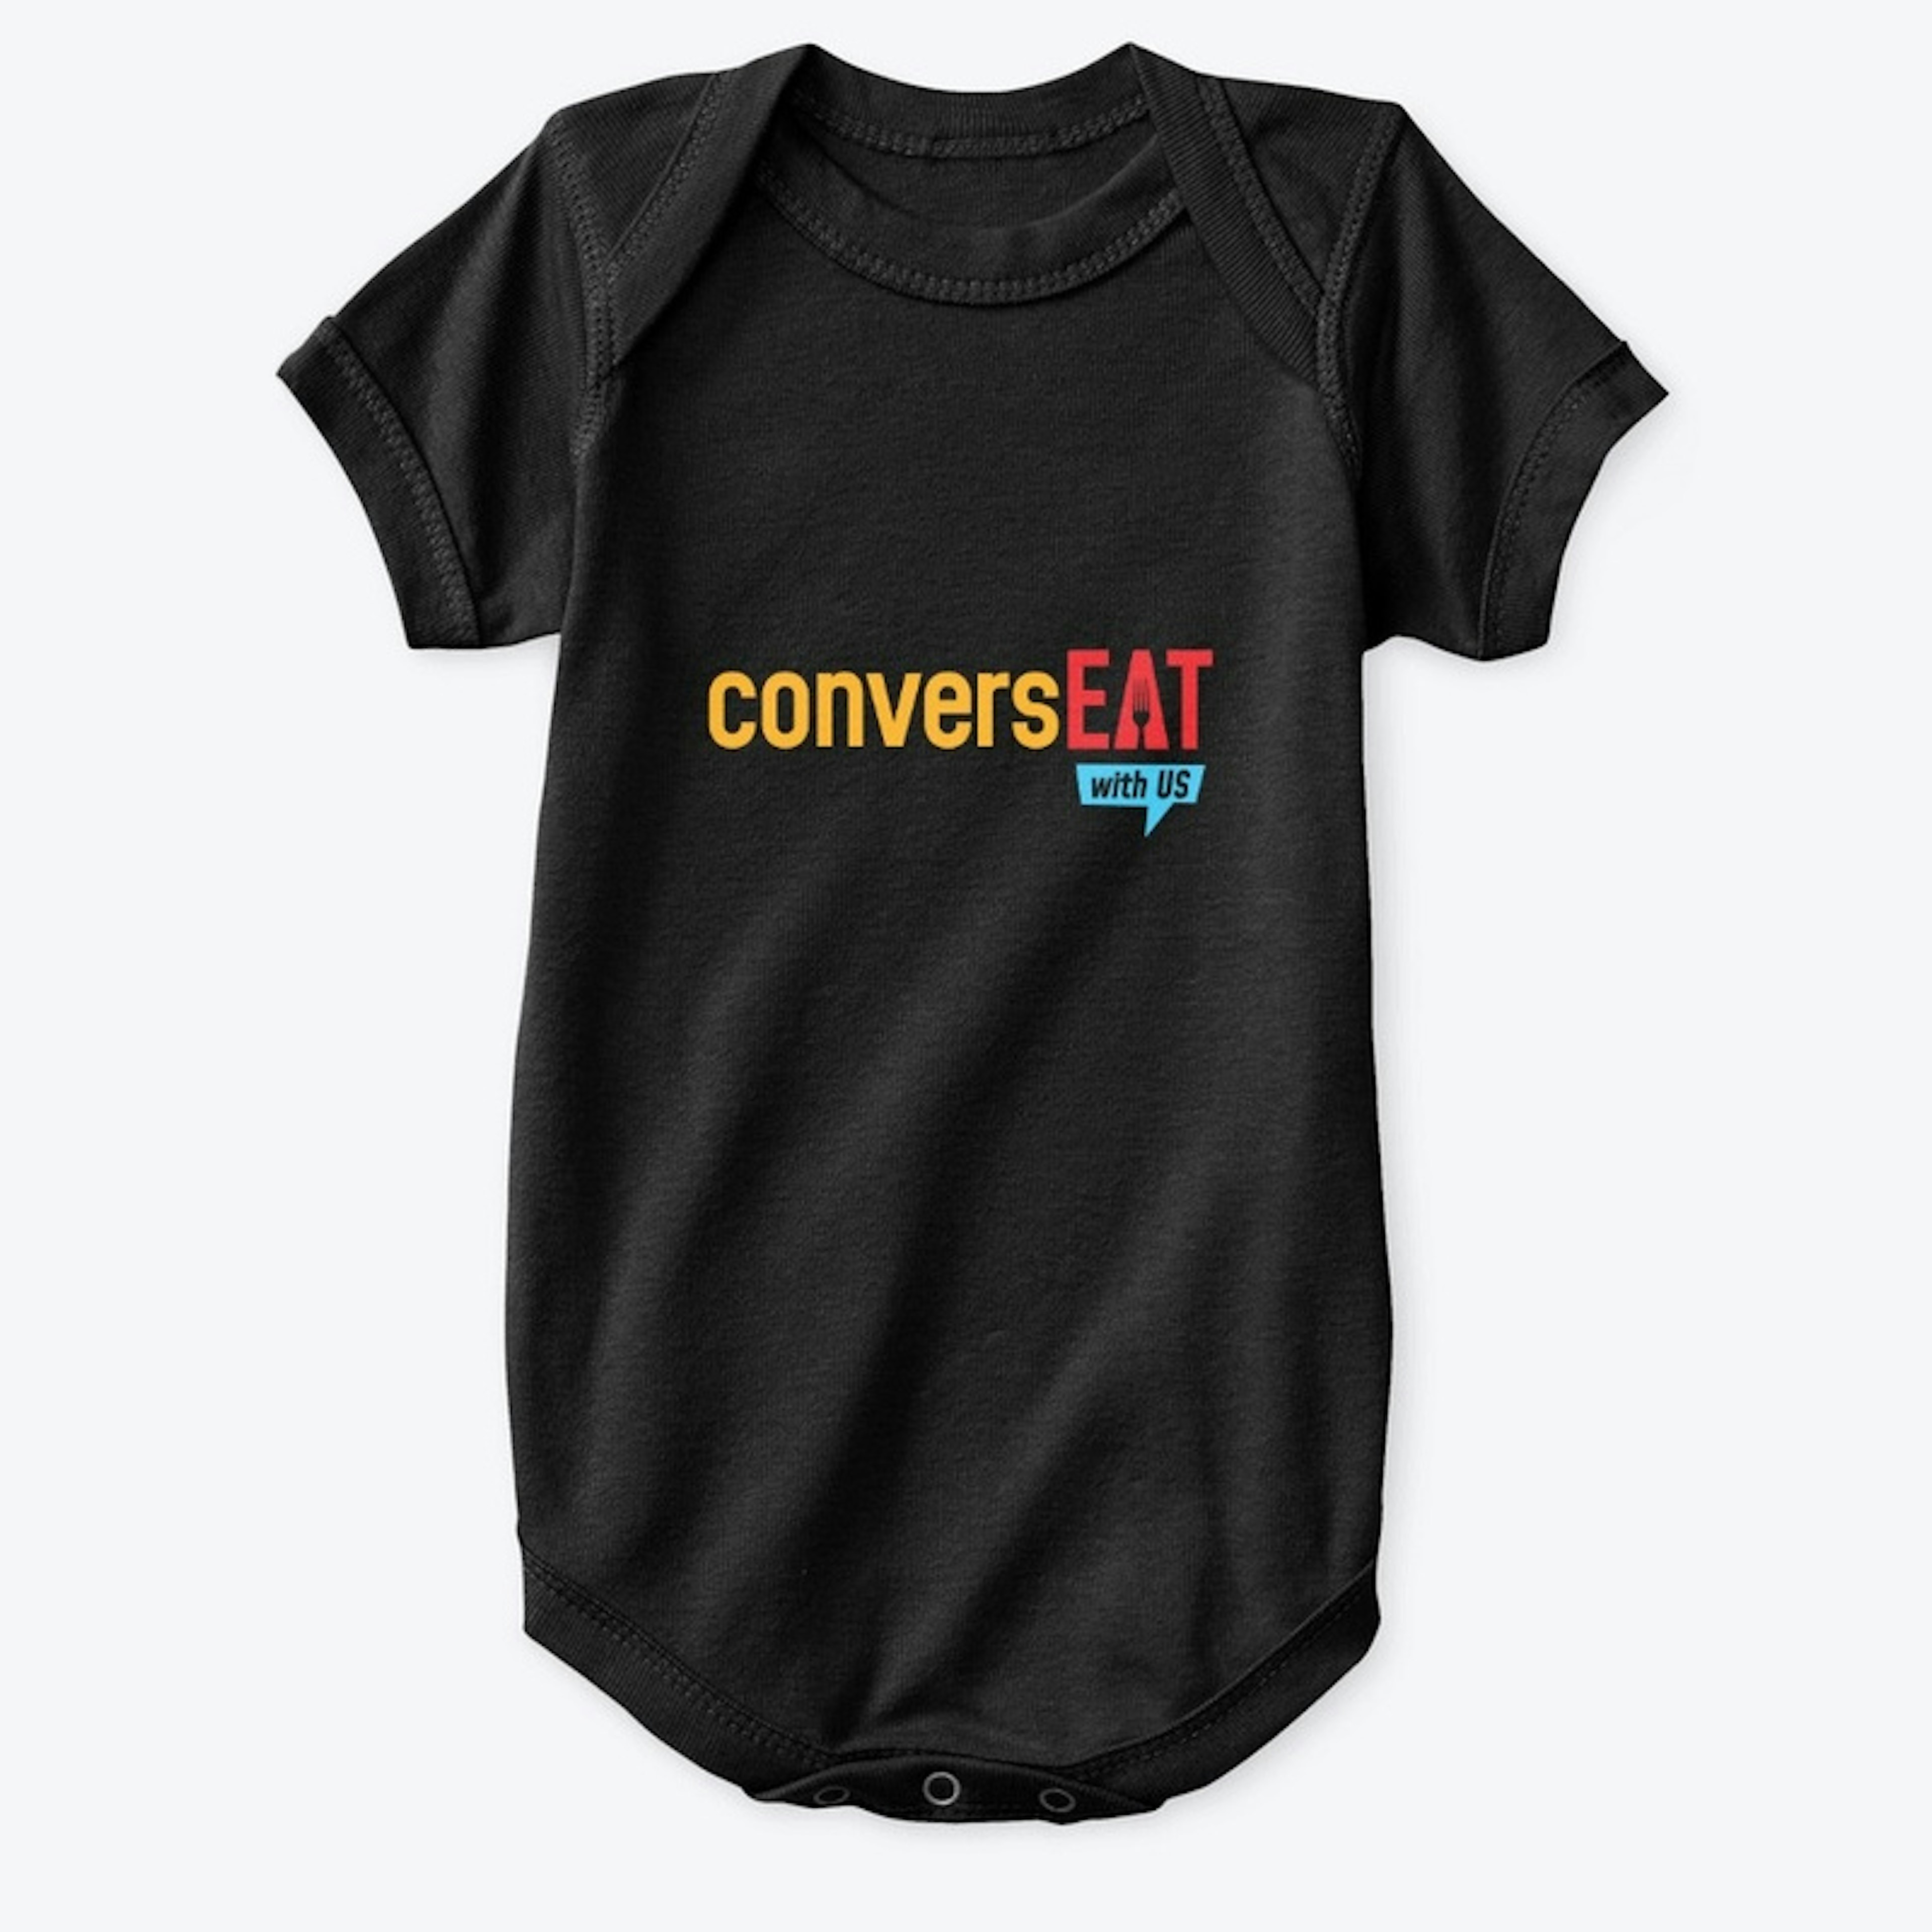 ConversEAT with US